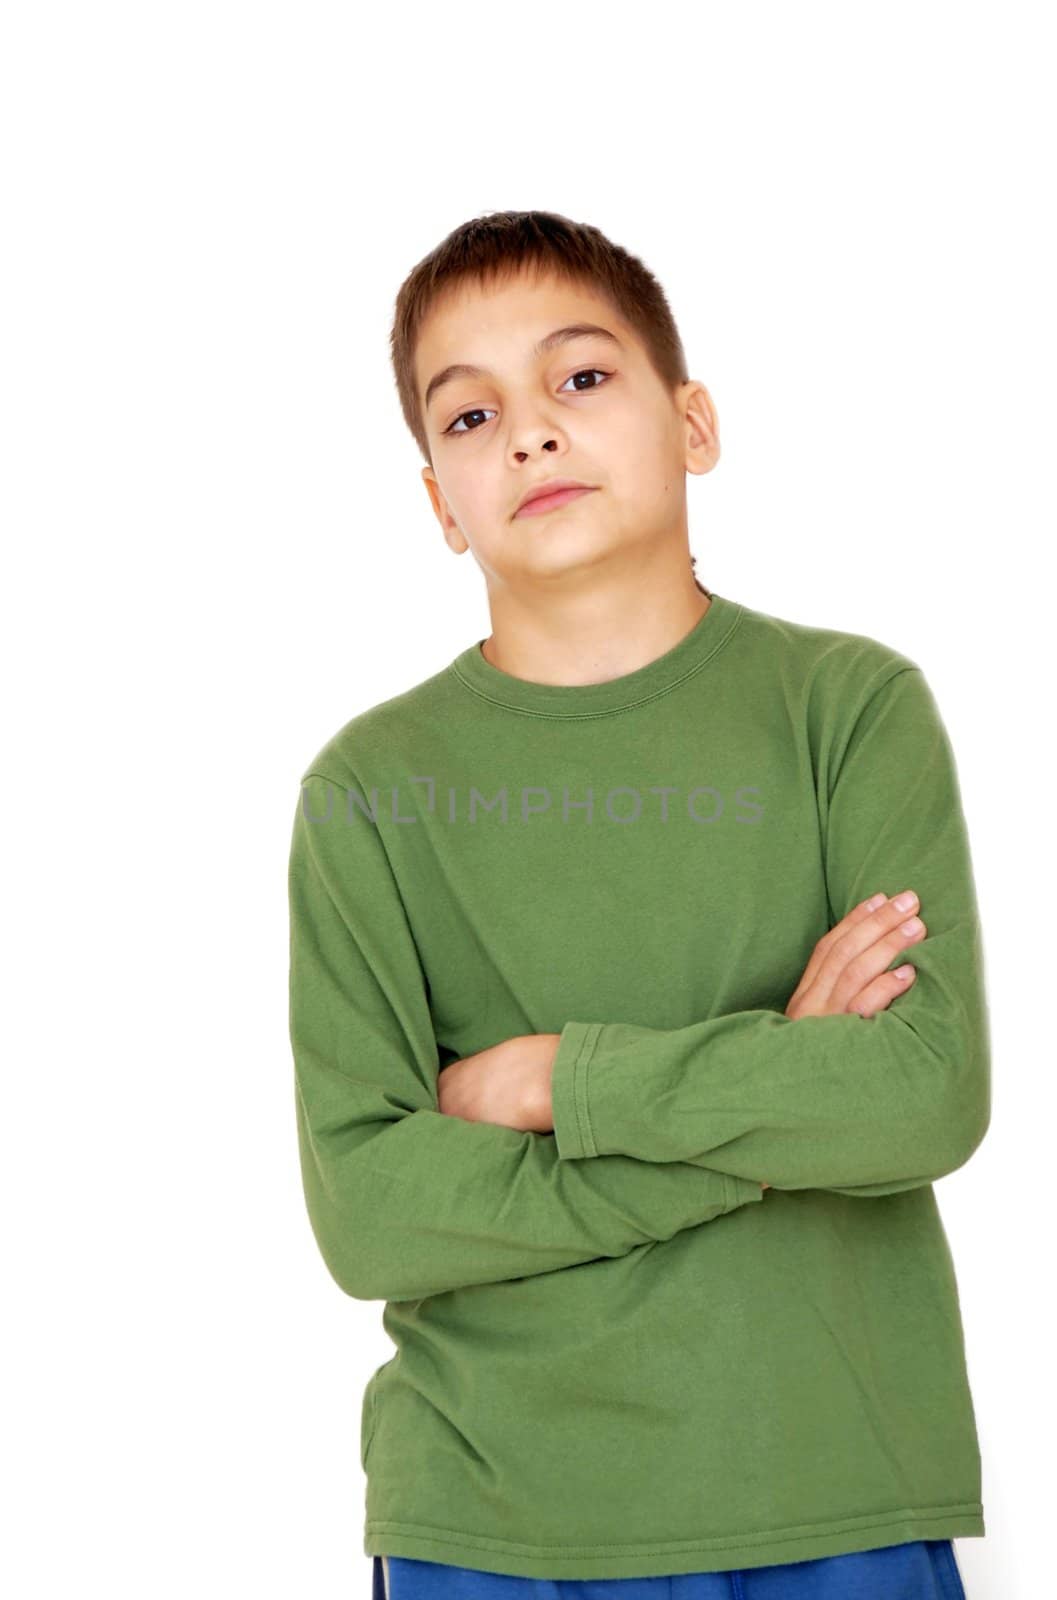 Teenage boy with crossed arms over white by simply